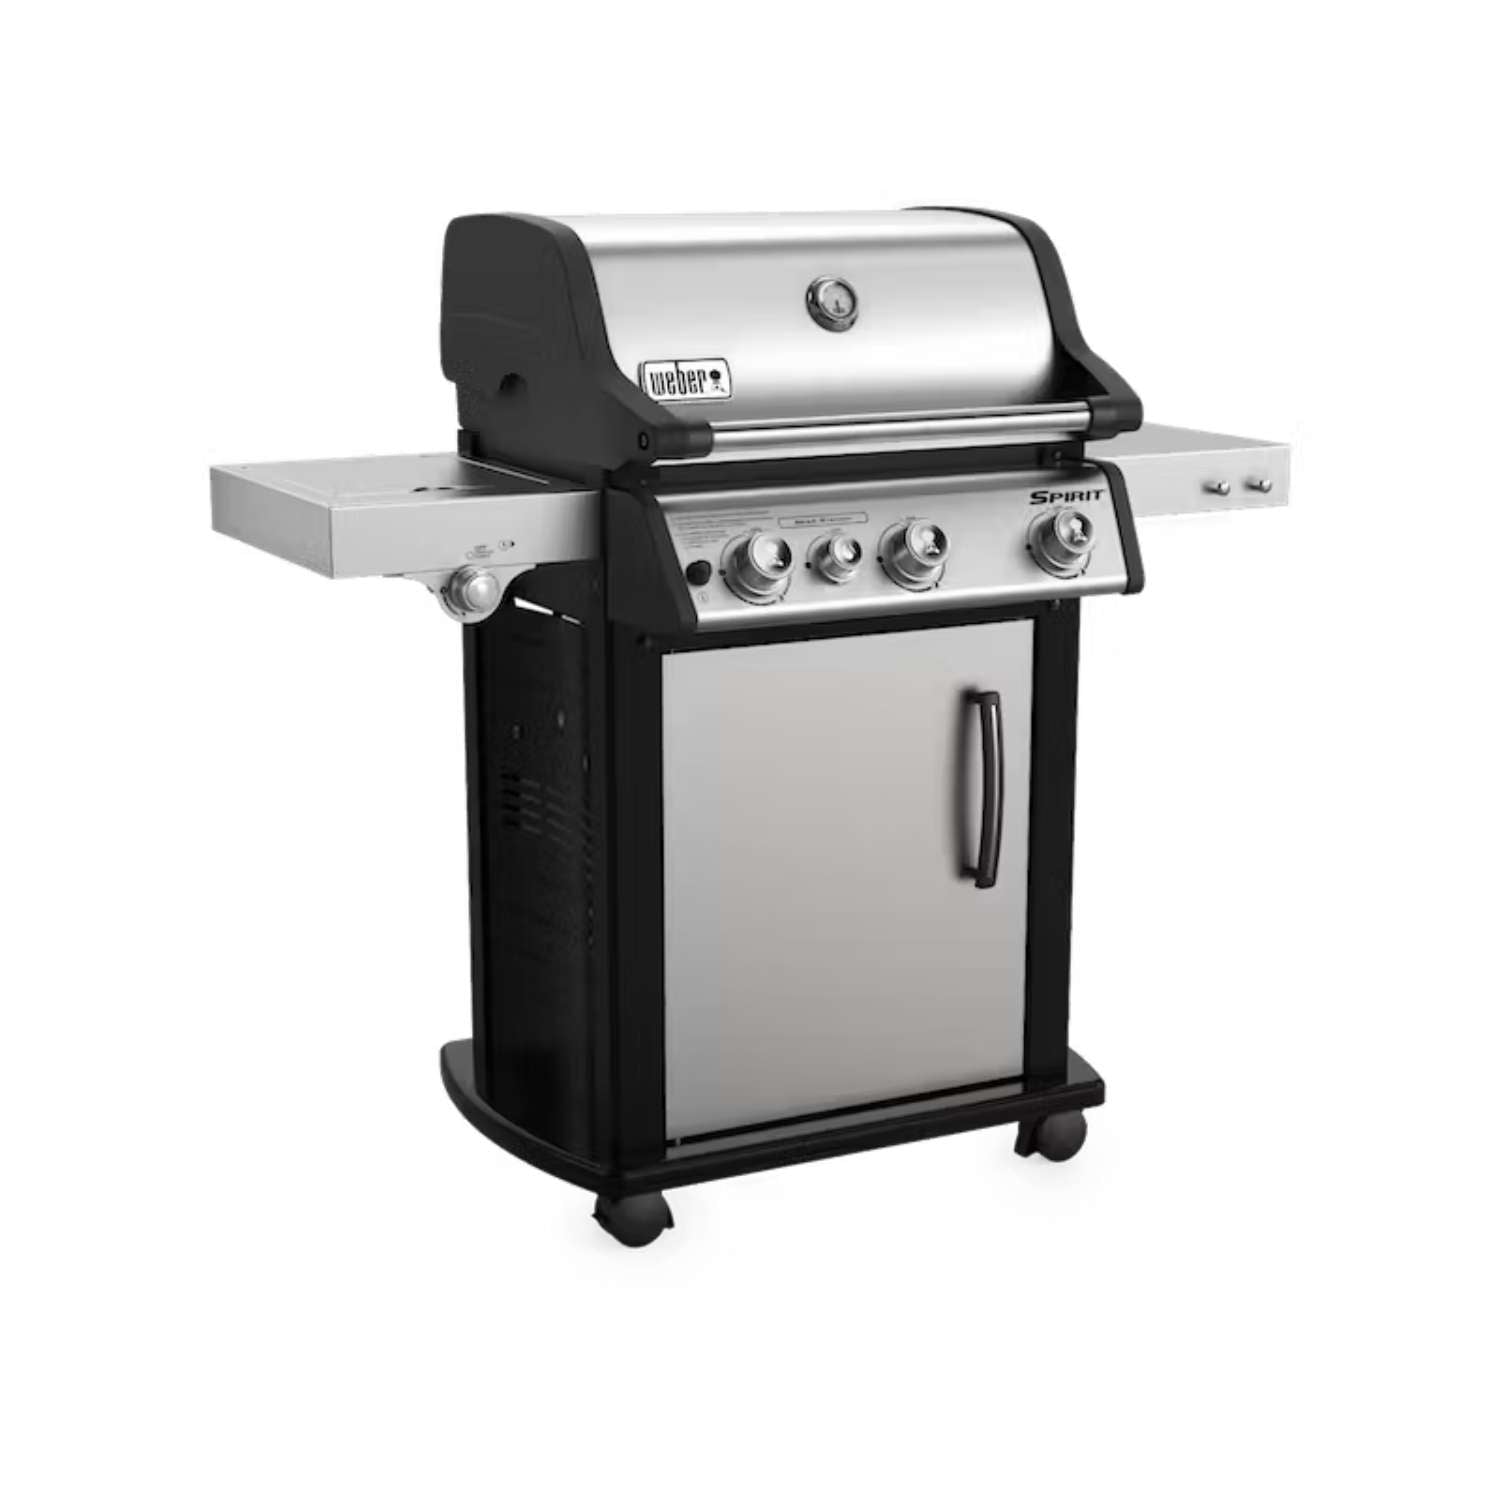 Weber Spirit SP-335 Grill perfect for outdoor barbecues available at MeatKing.hk7